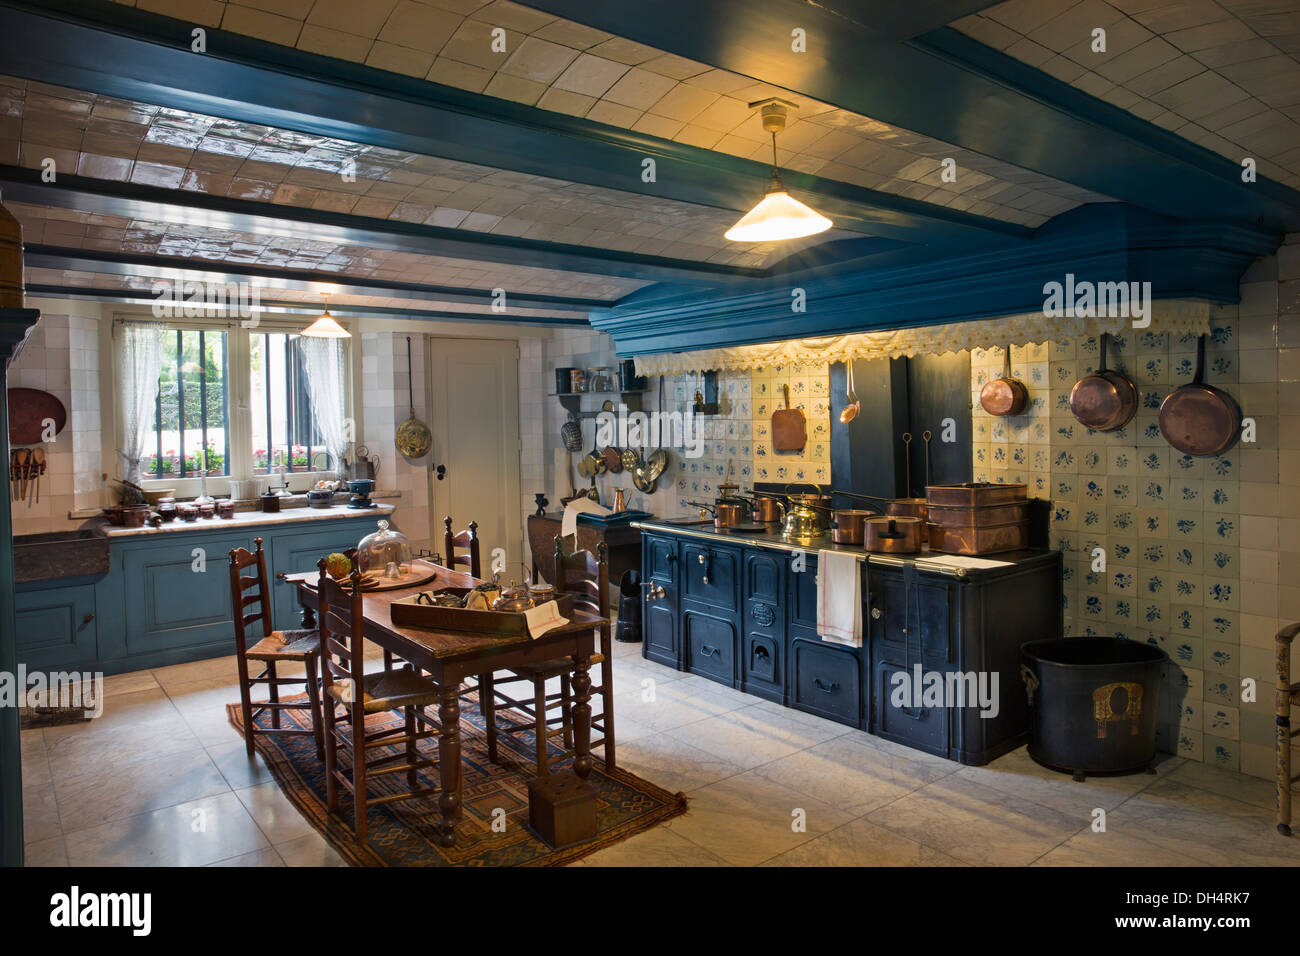 Holland Amsterdam, Museum Van Loon. Canal House of Amsterdam regent family Van Loon. Kitchen in the basement Stock Photo